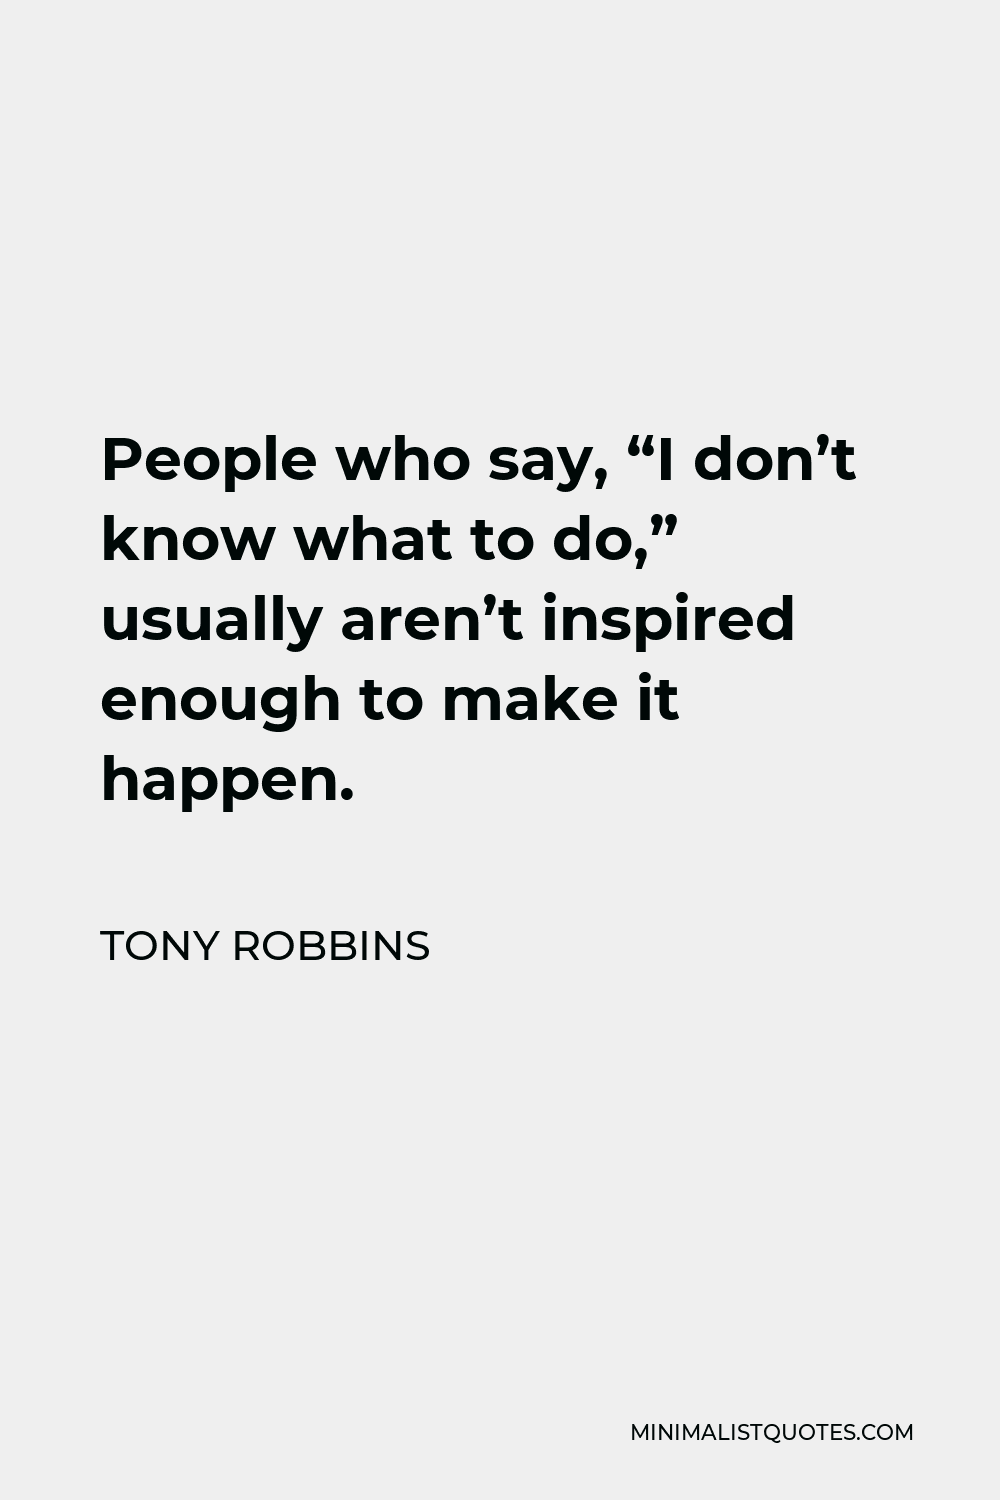 Tony Robbins Quote - People who say, “I don’t know what to do,” usually aren’t inspired enough to make it happen.